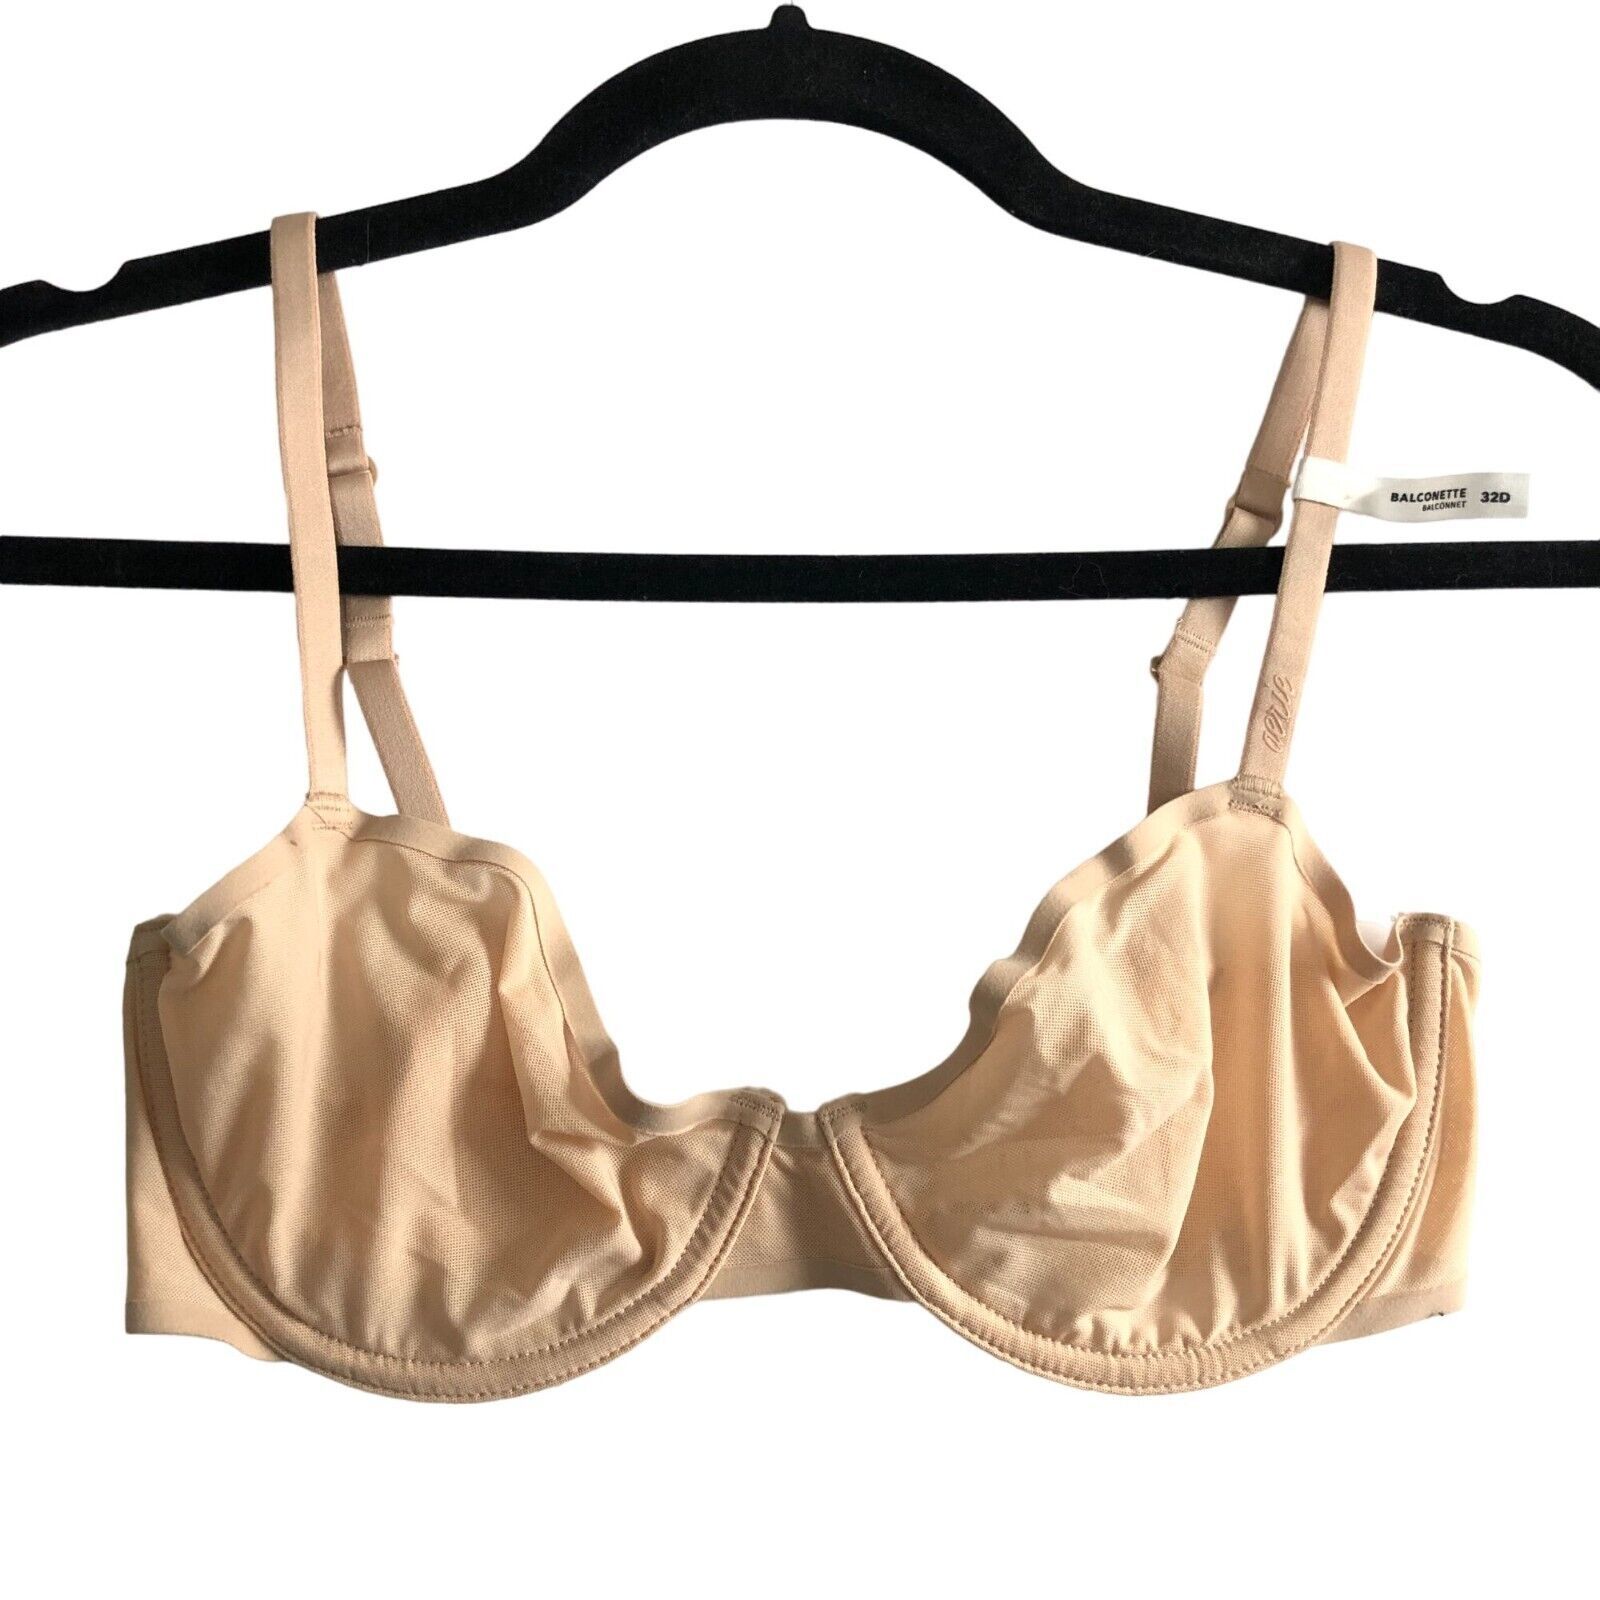 Primary image for Smoothez by Aerie Bra Beige Balconette Sheer Mesh Unlined Underwire 32D